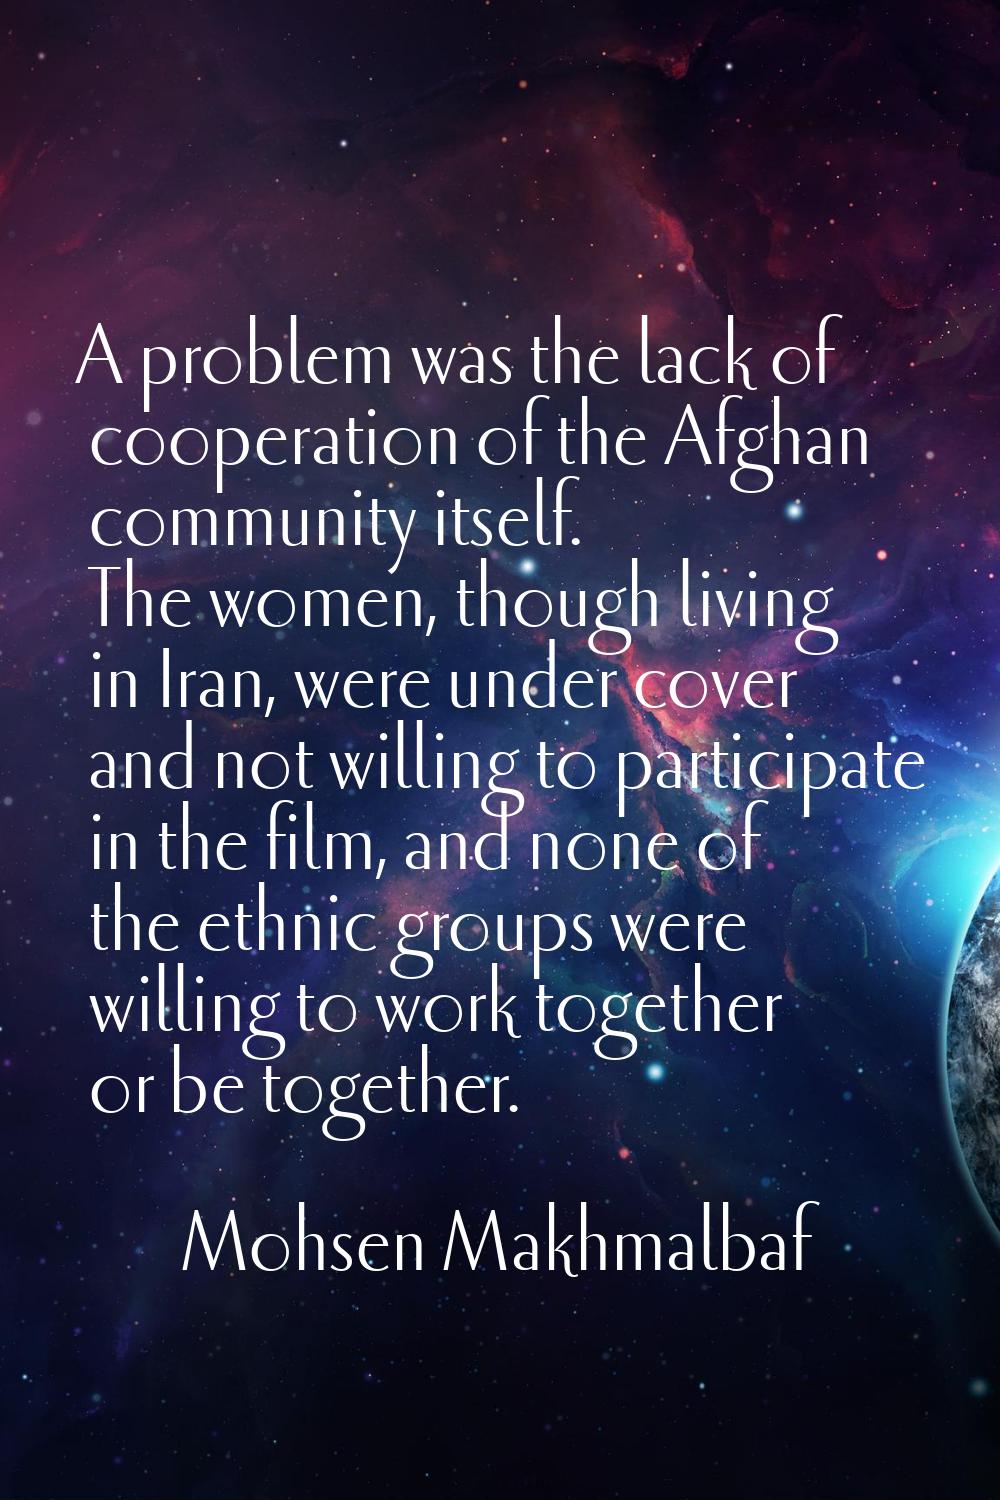 A problem was the lack of cooperation of the Afghan community itself. The women, though living in I